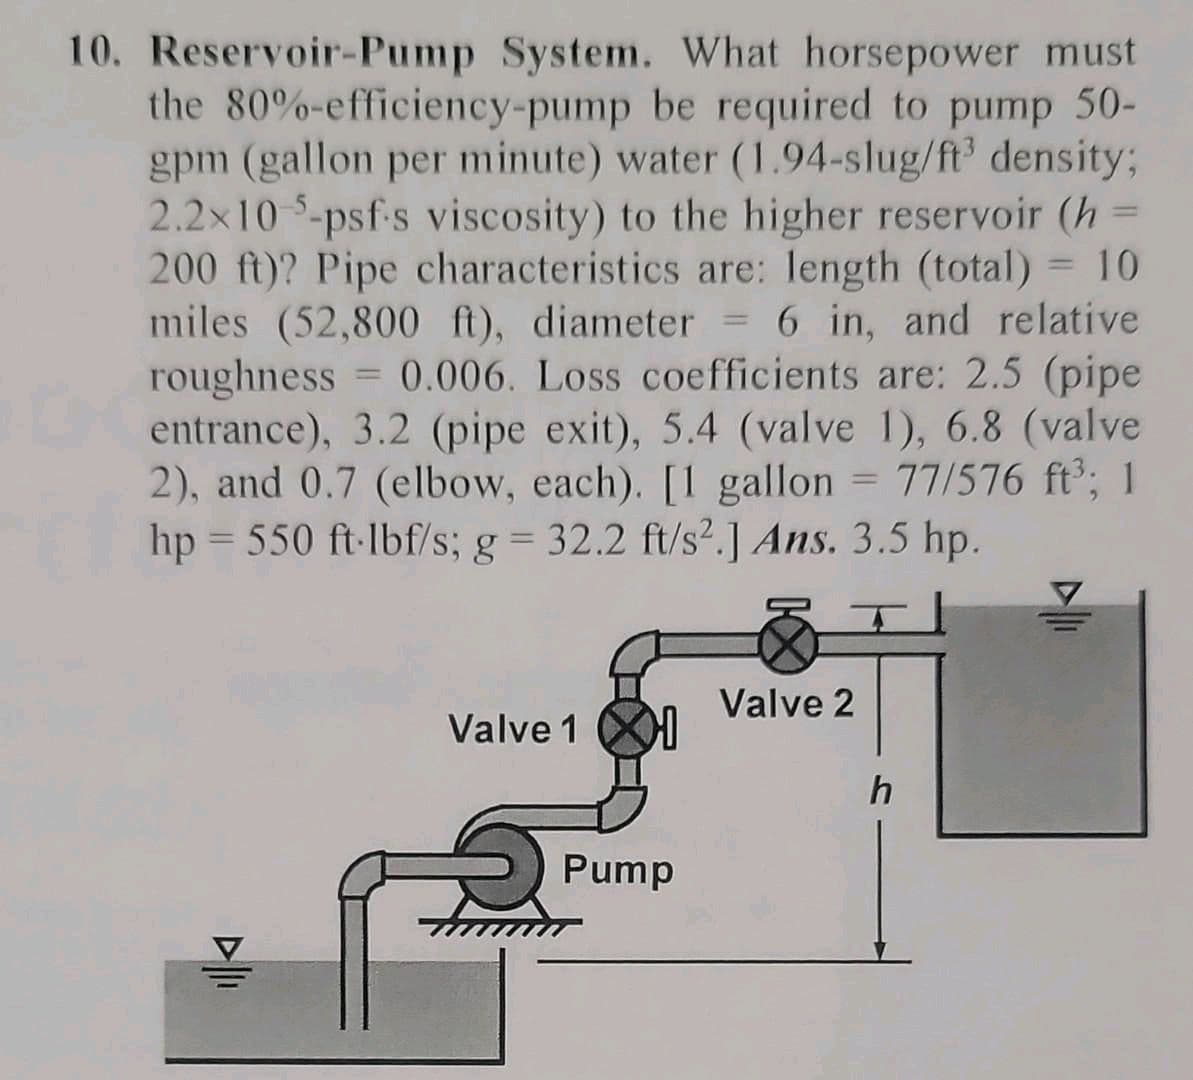 10. Reservoir-Pump System. What horsepower must
the 80%-efficiency-pump be required to pump 50-
gpm (gallon per minute) water (1.94-slug/ft3 density;
2.2x10 5-psf-s viscosity) to the higher reservoir (h=
200 ft)? Pipe characteristics are: length (total) = 10
miles (52,800 ft), diameter = 6 in, and relative
roughness=0.006. Loss coefficients are: 2.5 (pipe
entrance), 3.2 (pipe exit), 5.4 (valve 1), 6.8 (valve
2), and 0.7 (elbow, each). [1 gallon = 77/576 ft³; 1
hp = 550 ft·lbf/s; g = 32.2 ft/s².] Ans. 3.5 hp.
Valve 1
F
Pump
Valve 2
h